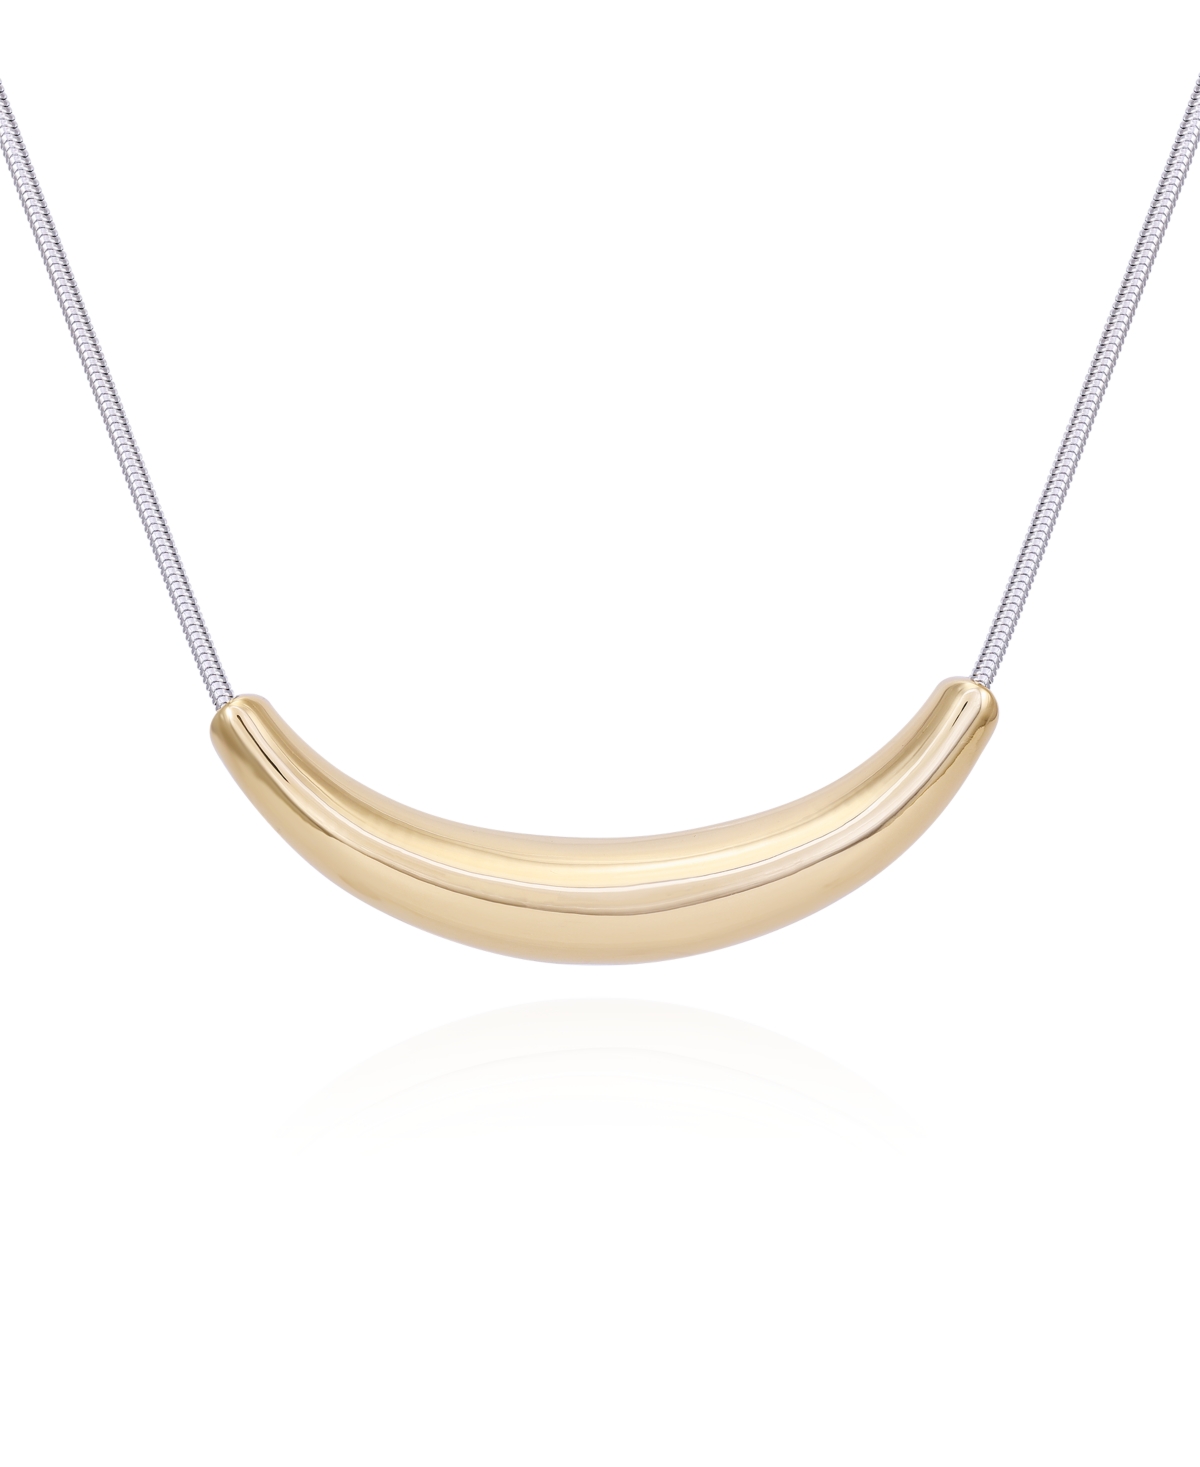 Two-Tone Statement Necklace, 18" + 2" Extension - Gold